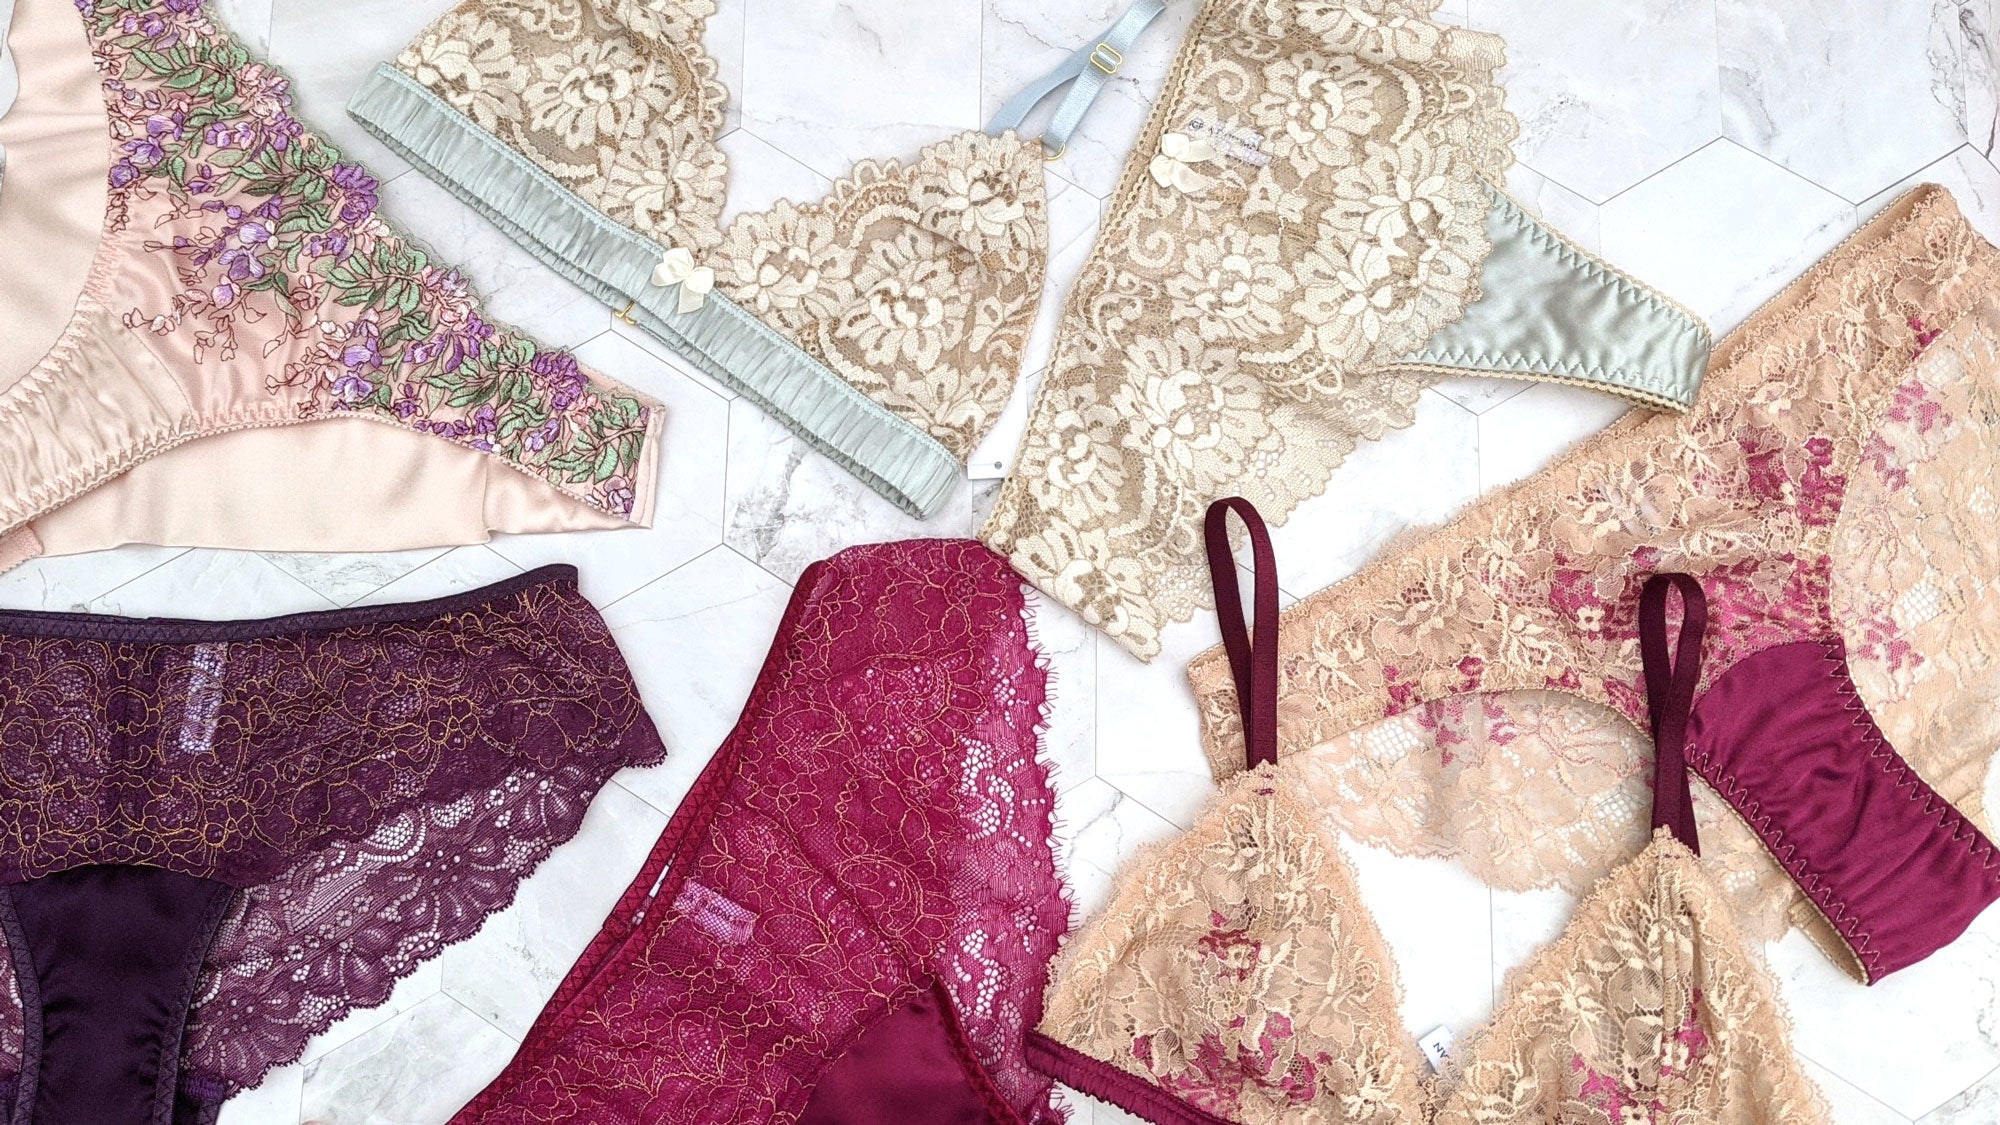 6 ways to mix and match your lingerie On purpose!